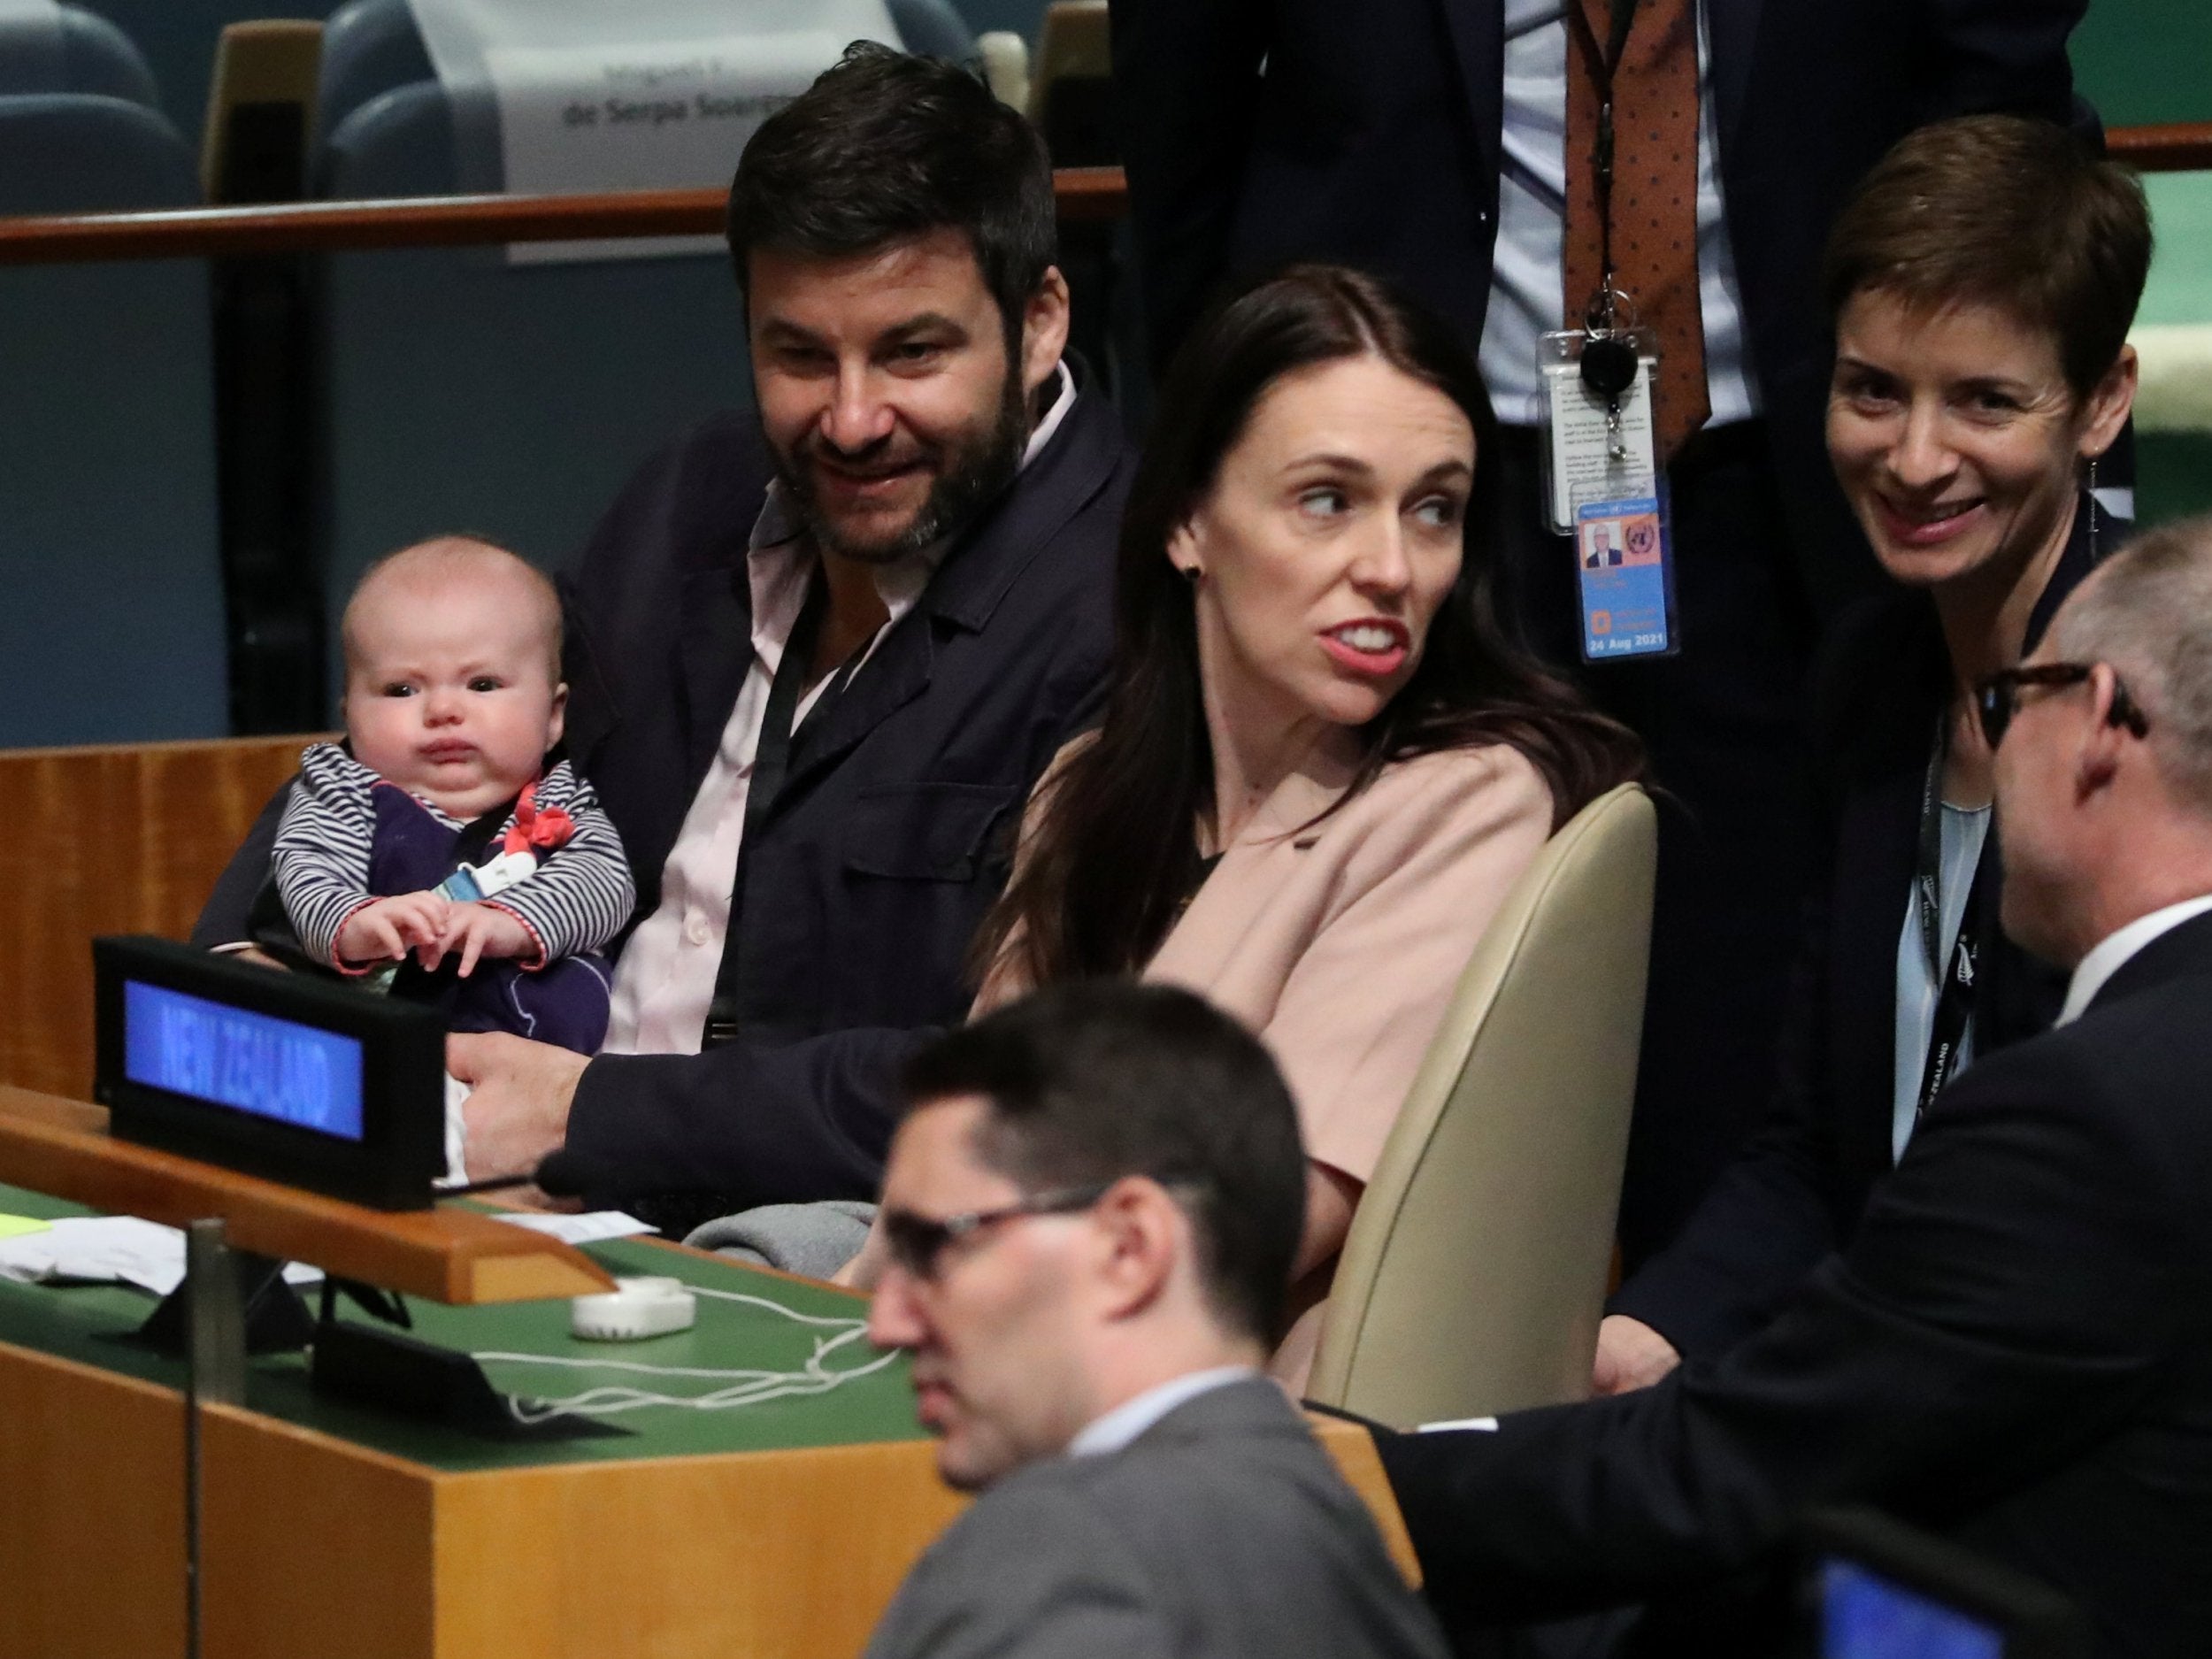 New Zealand Prime Minister Jacinda Ardern sits with her baby Neve at the UN